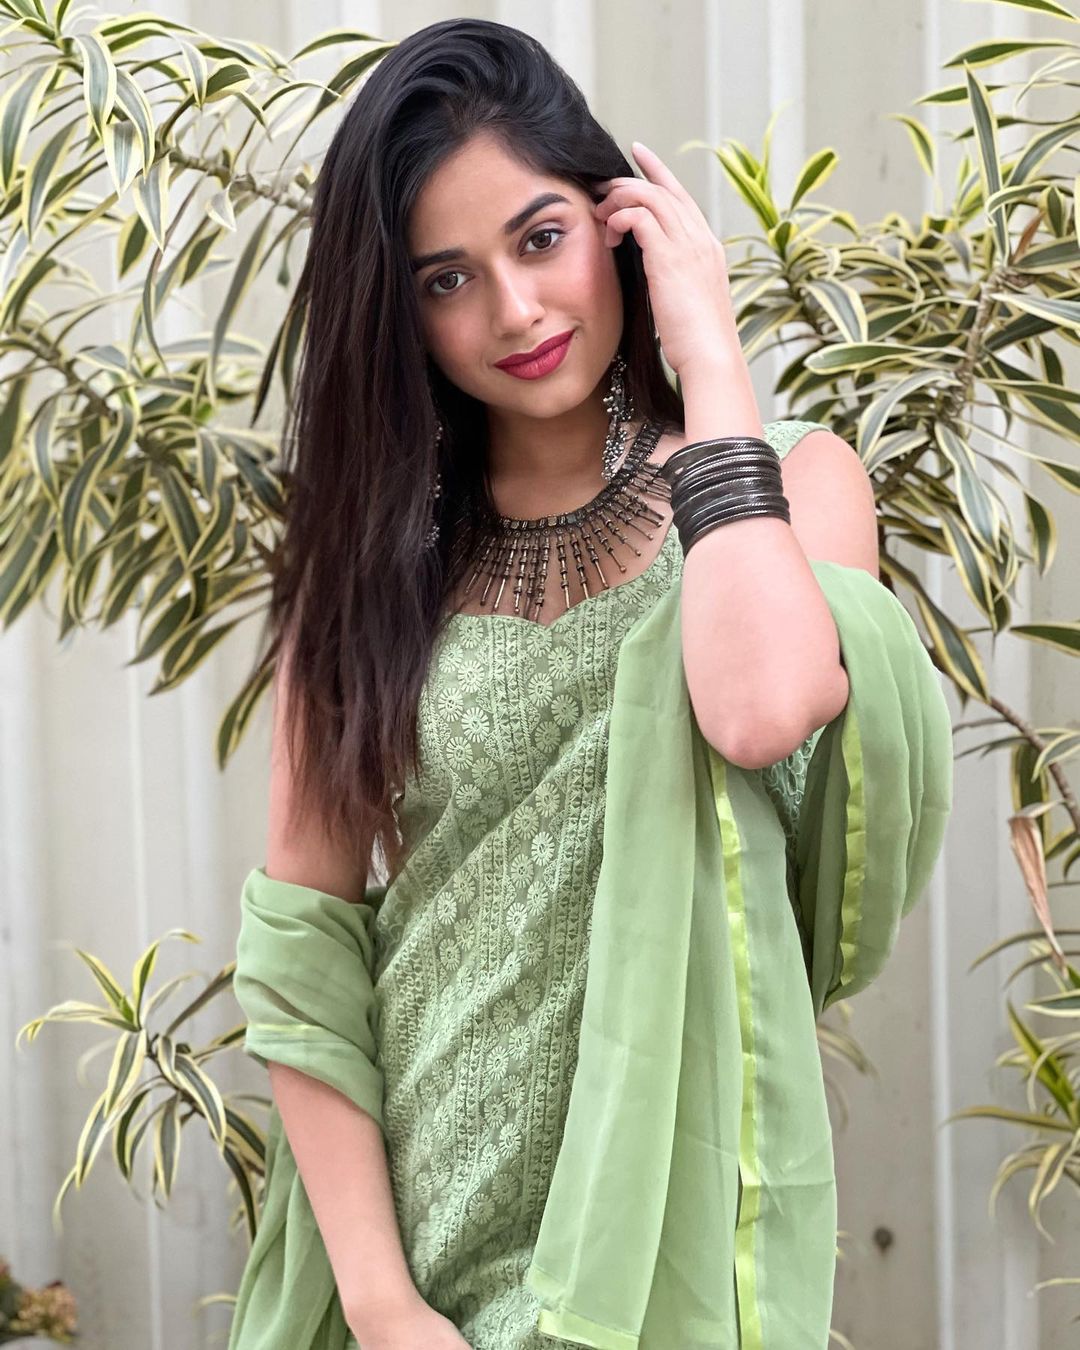 Jannat Zubair Rahmani is blowing everyone's senses with her stylish necklace, see photos 6075